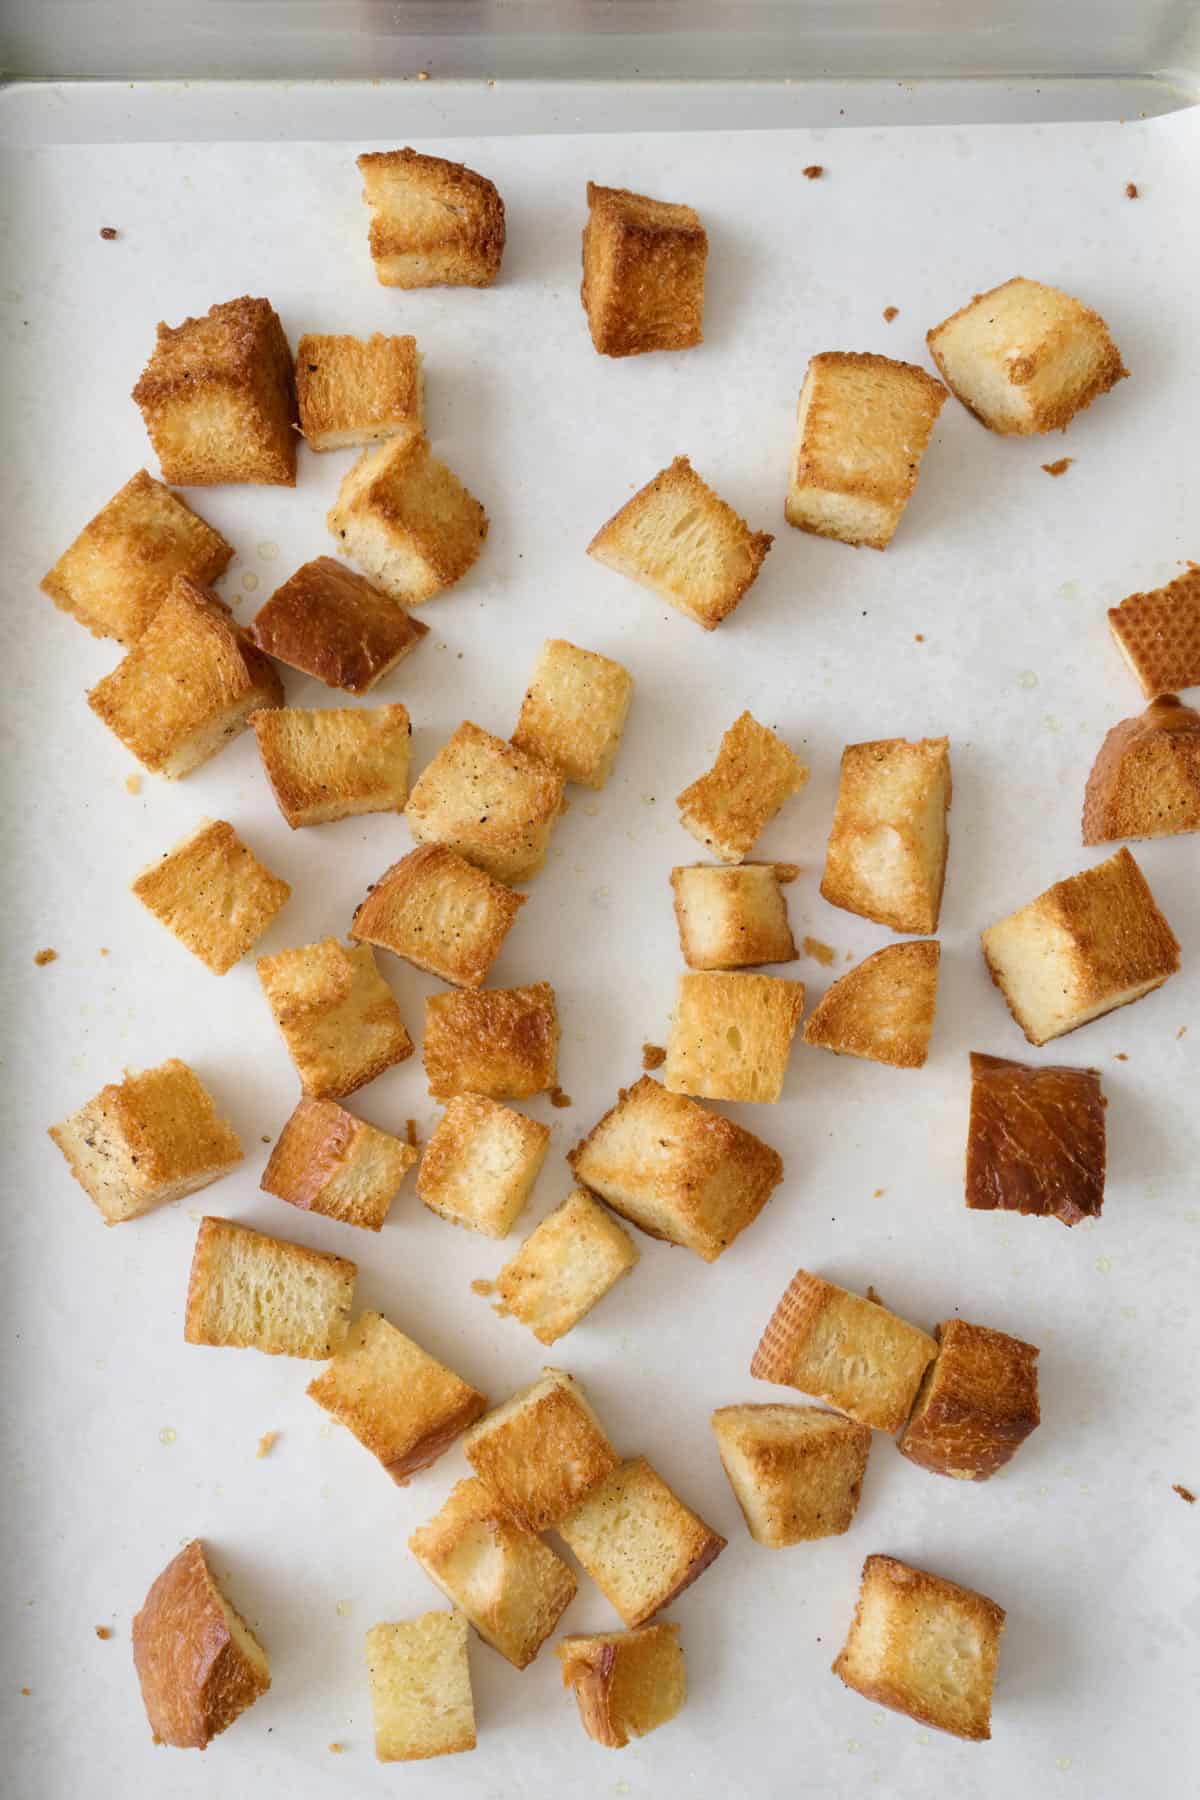 Homemade croutons after baking on a sheet pan.